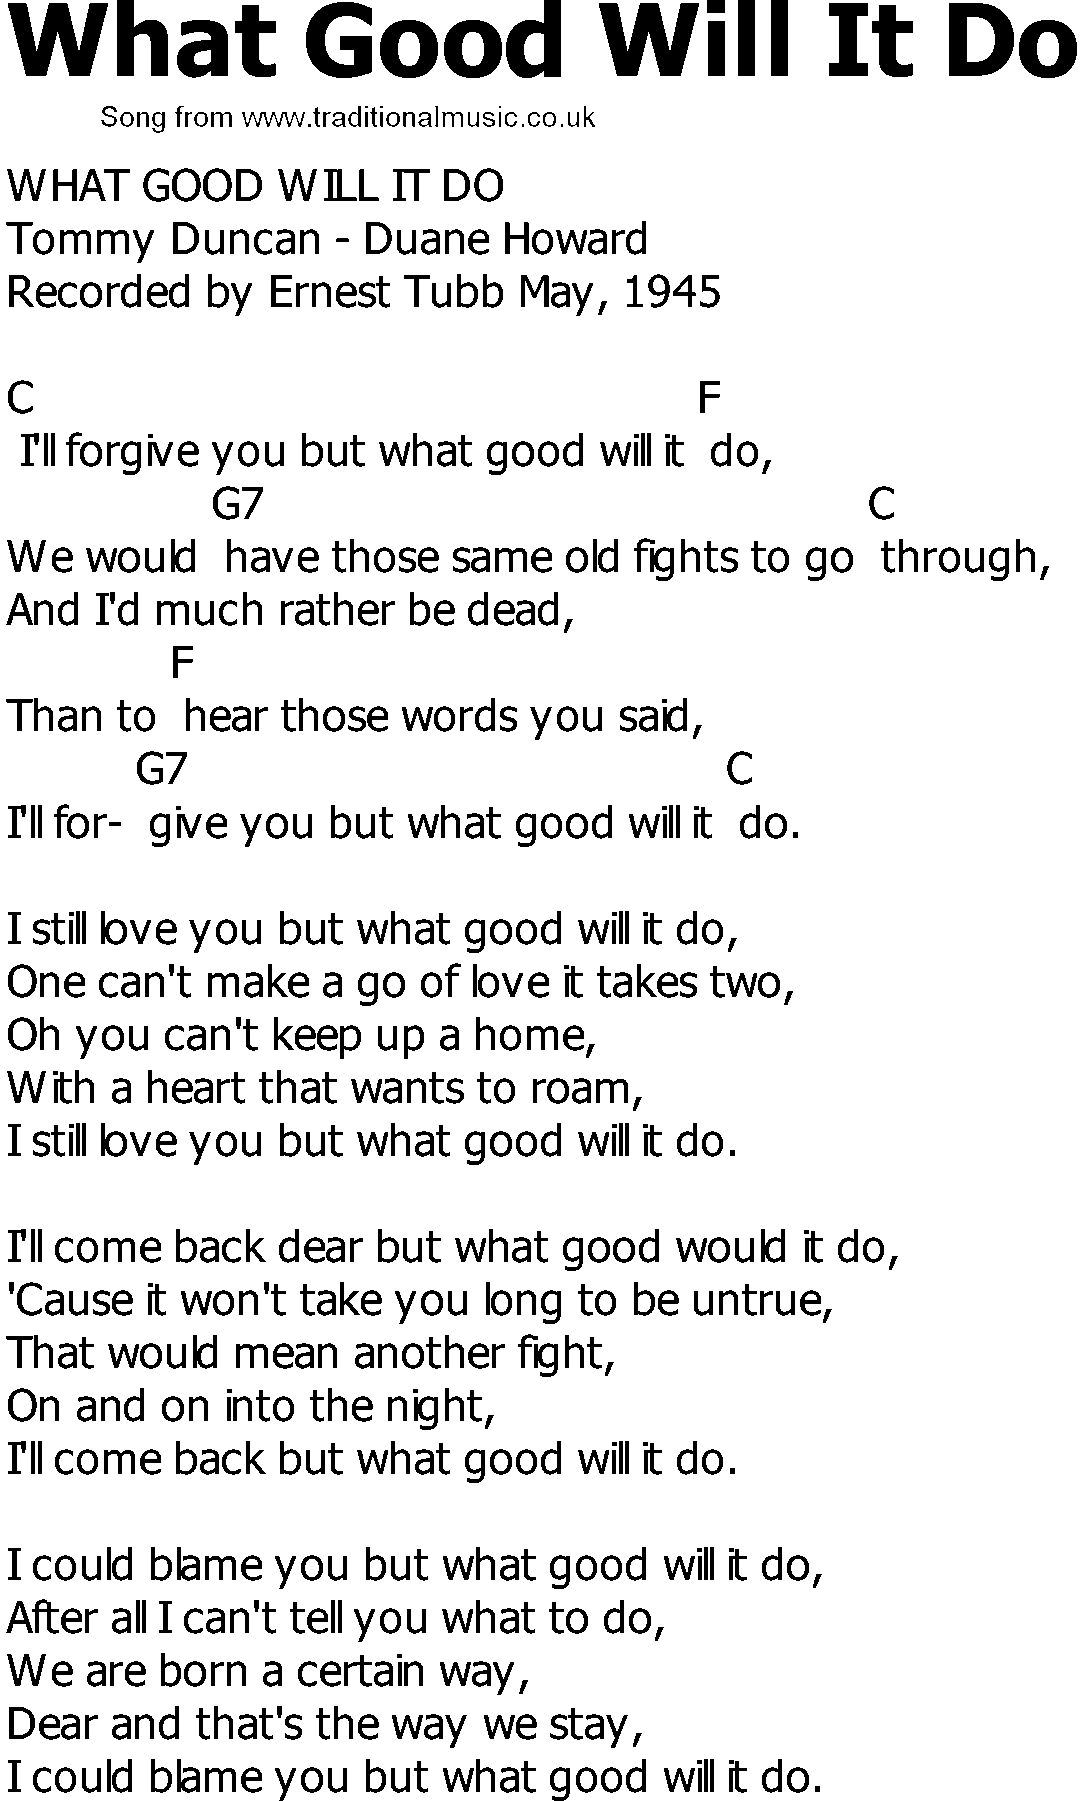 Old Country song lyrics with chords - What Good Will It Do